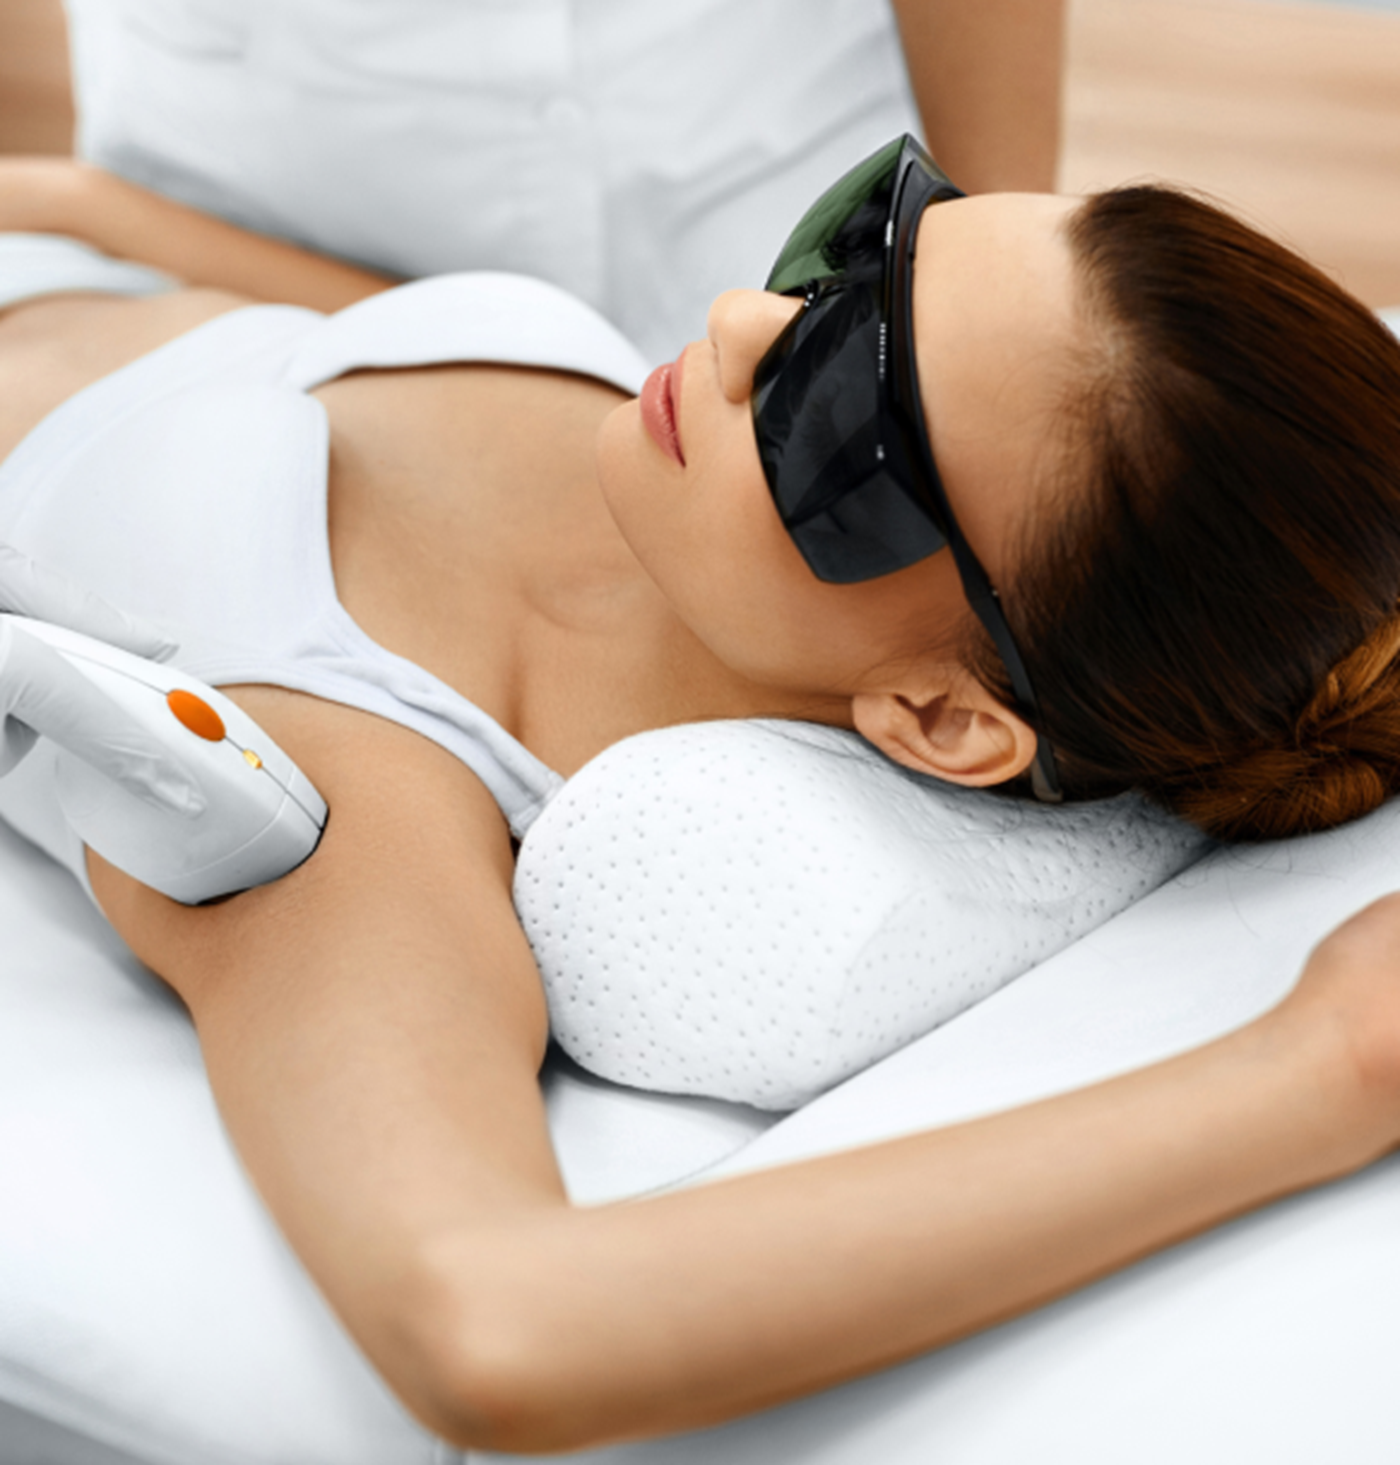 Where to get Laser Hair Removal in Melbourne Before Summer | Sitchu  Melbourne